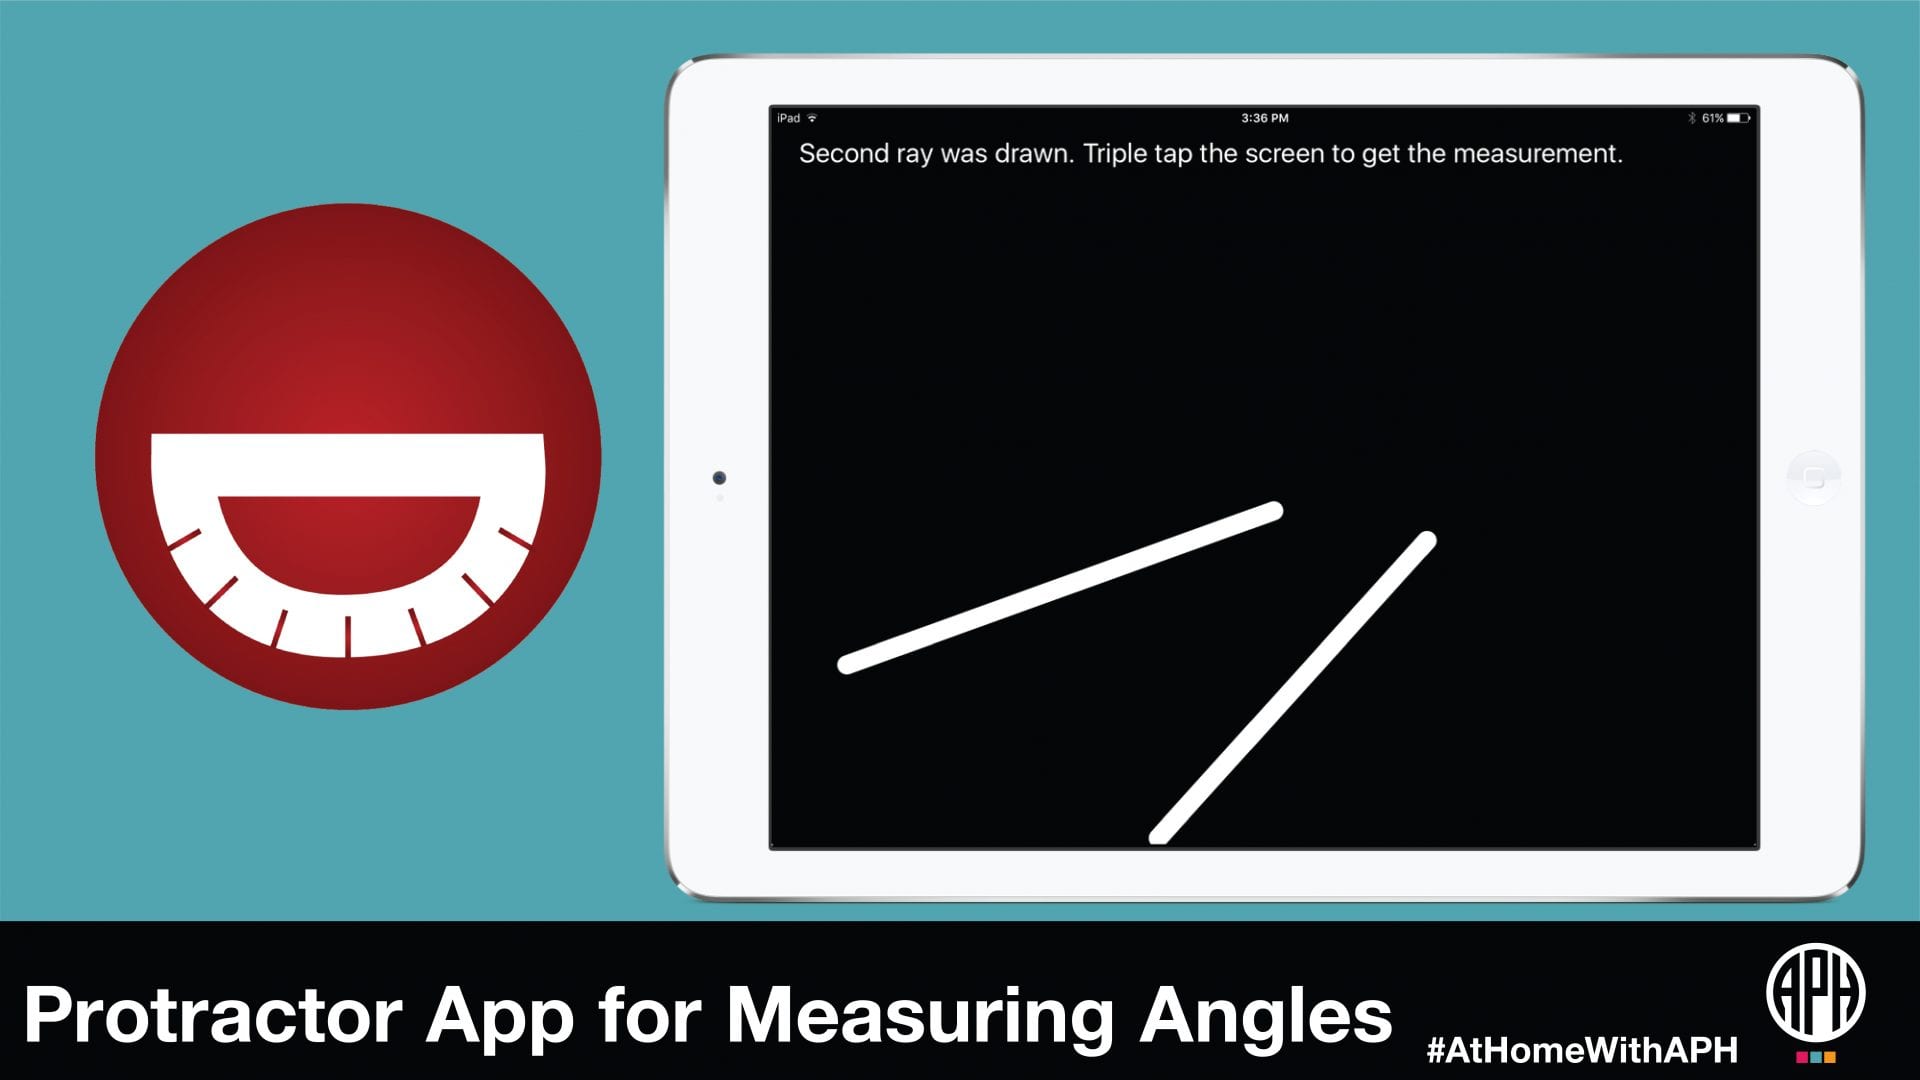 a graphic of he Draw2Measure logo and an illustration of a tablet. text reads "Protractor App for Measuring Angles #AtHomeWithAPH"